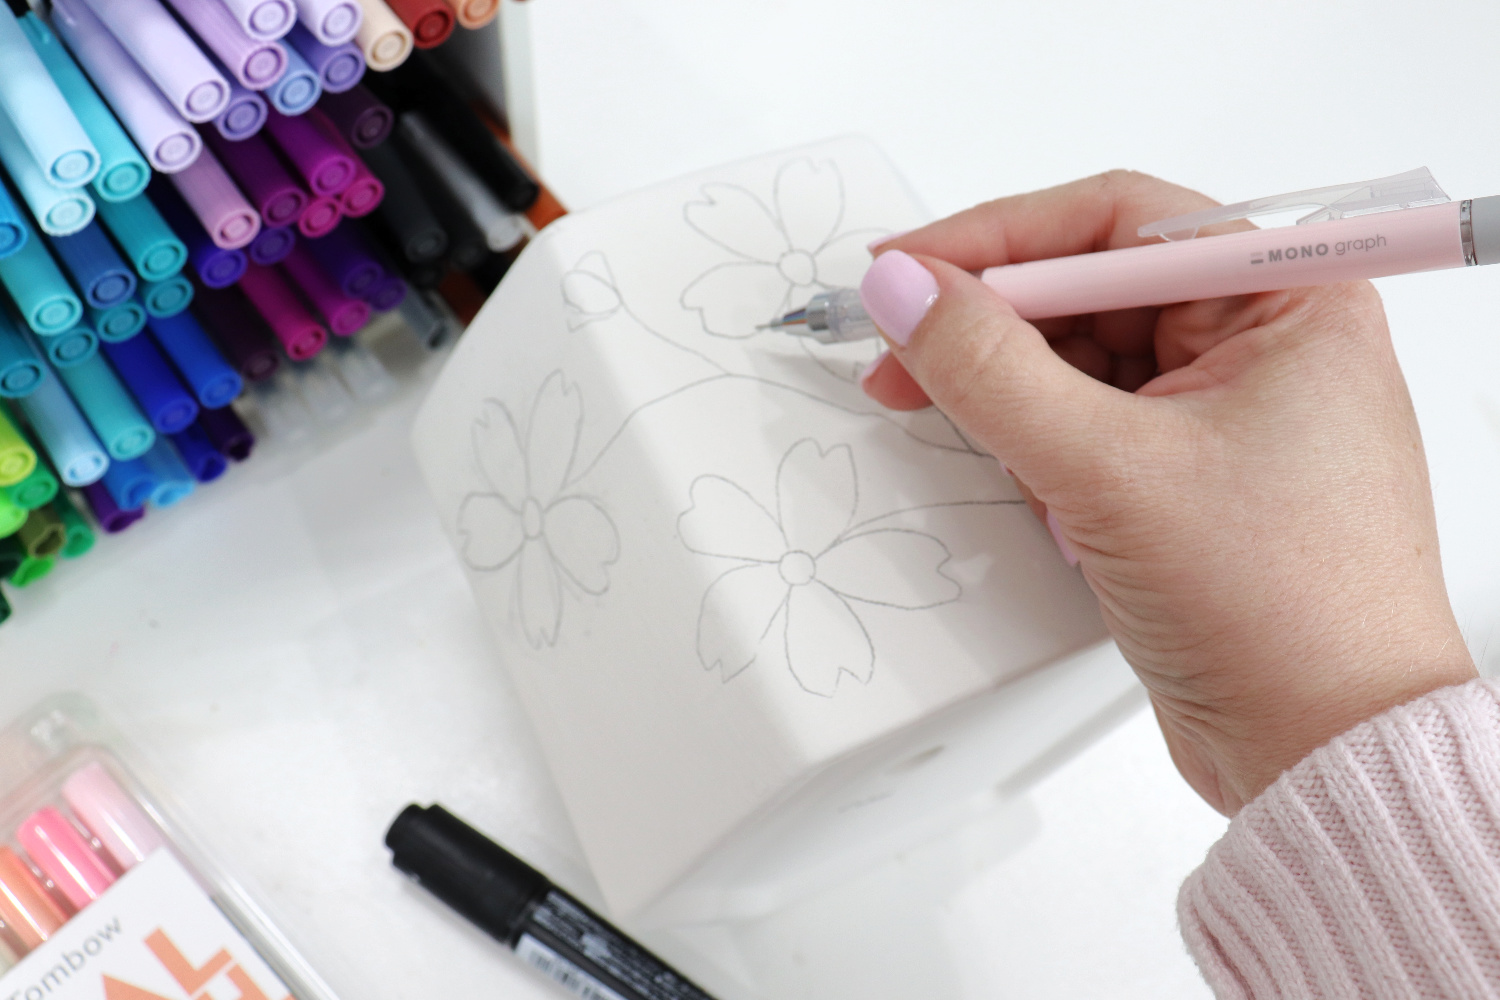 Image contains Amy’s hand holding a pink mechanical pencil and sketching cherry blossoms onto a white planter. A black marker and an organizer full of colored markers sit nearby.